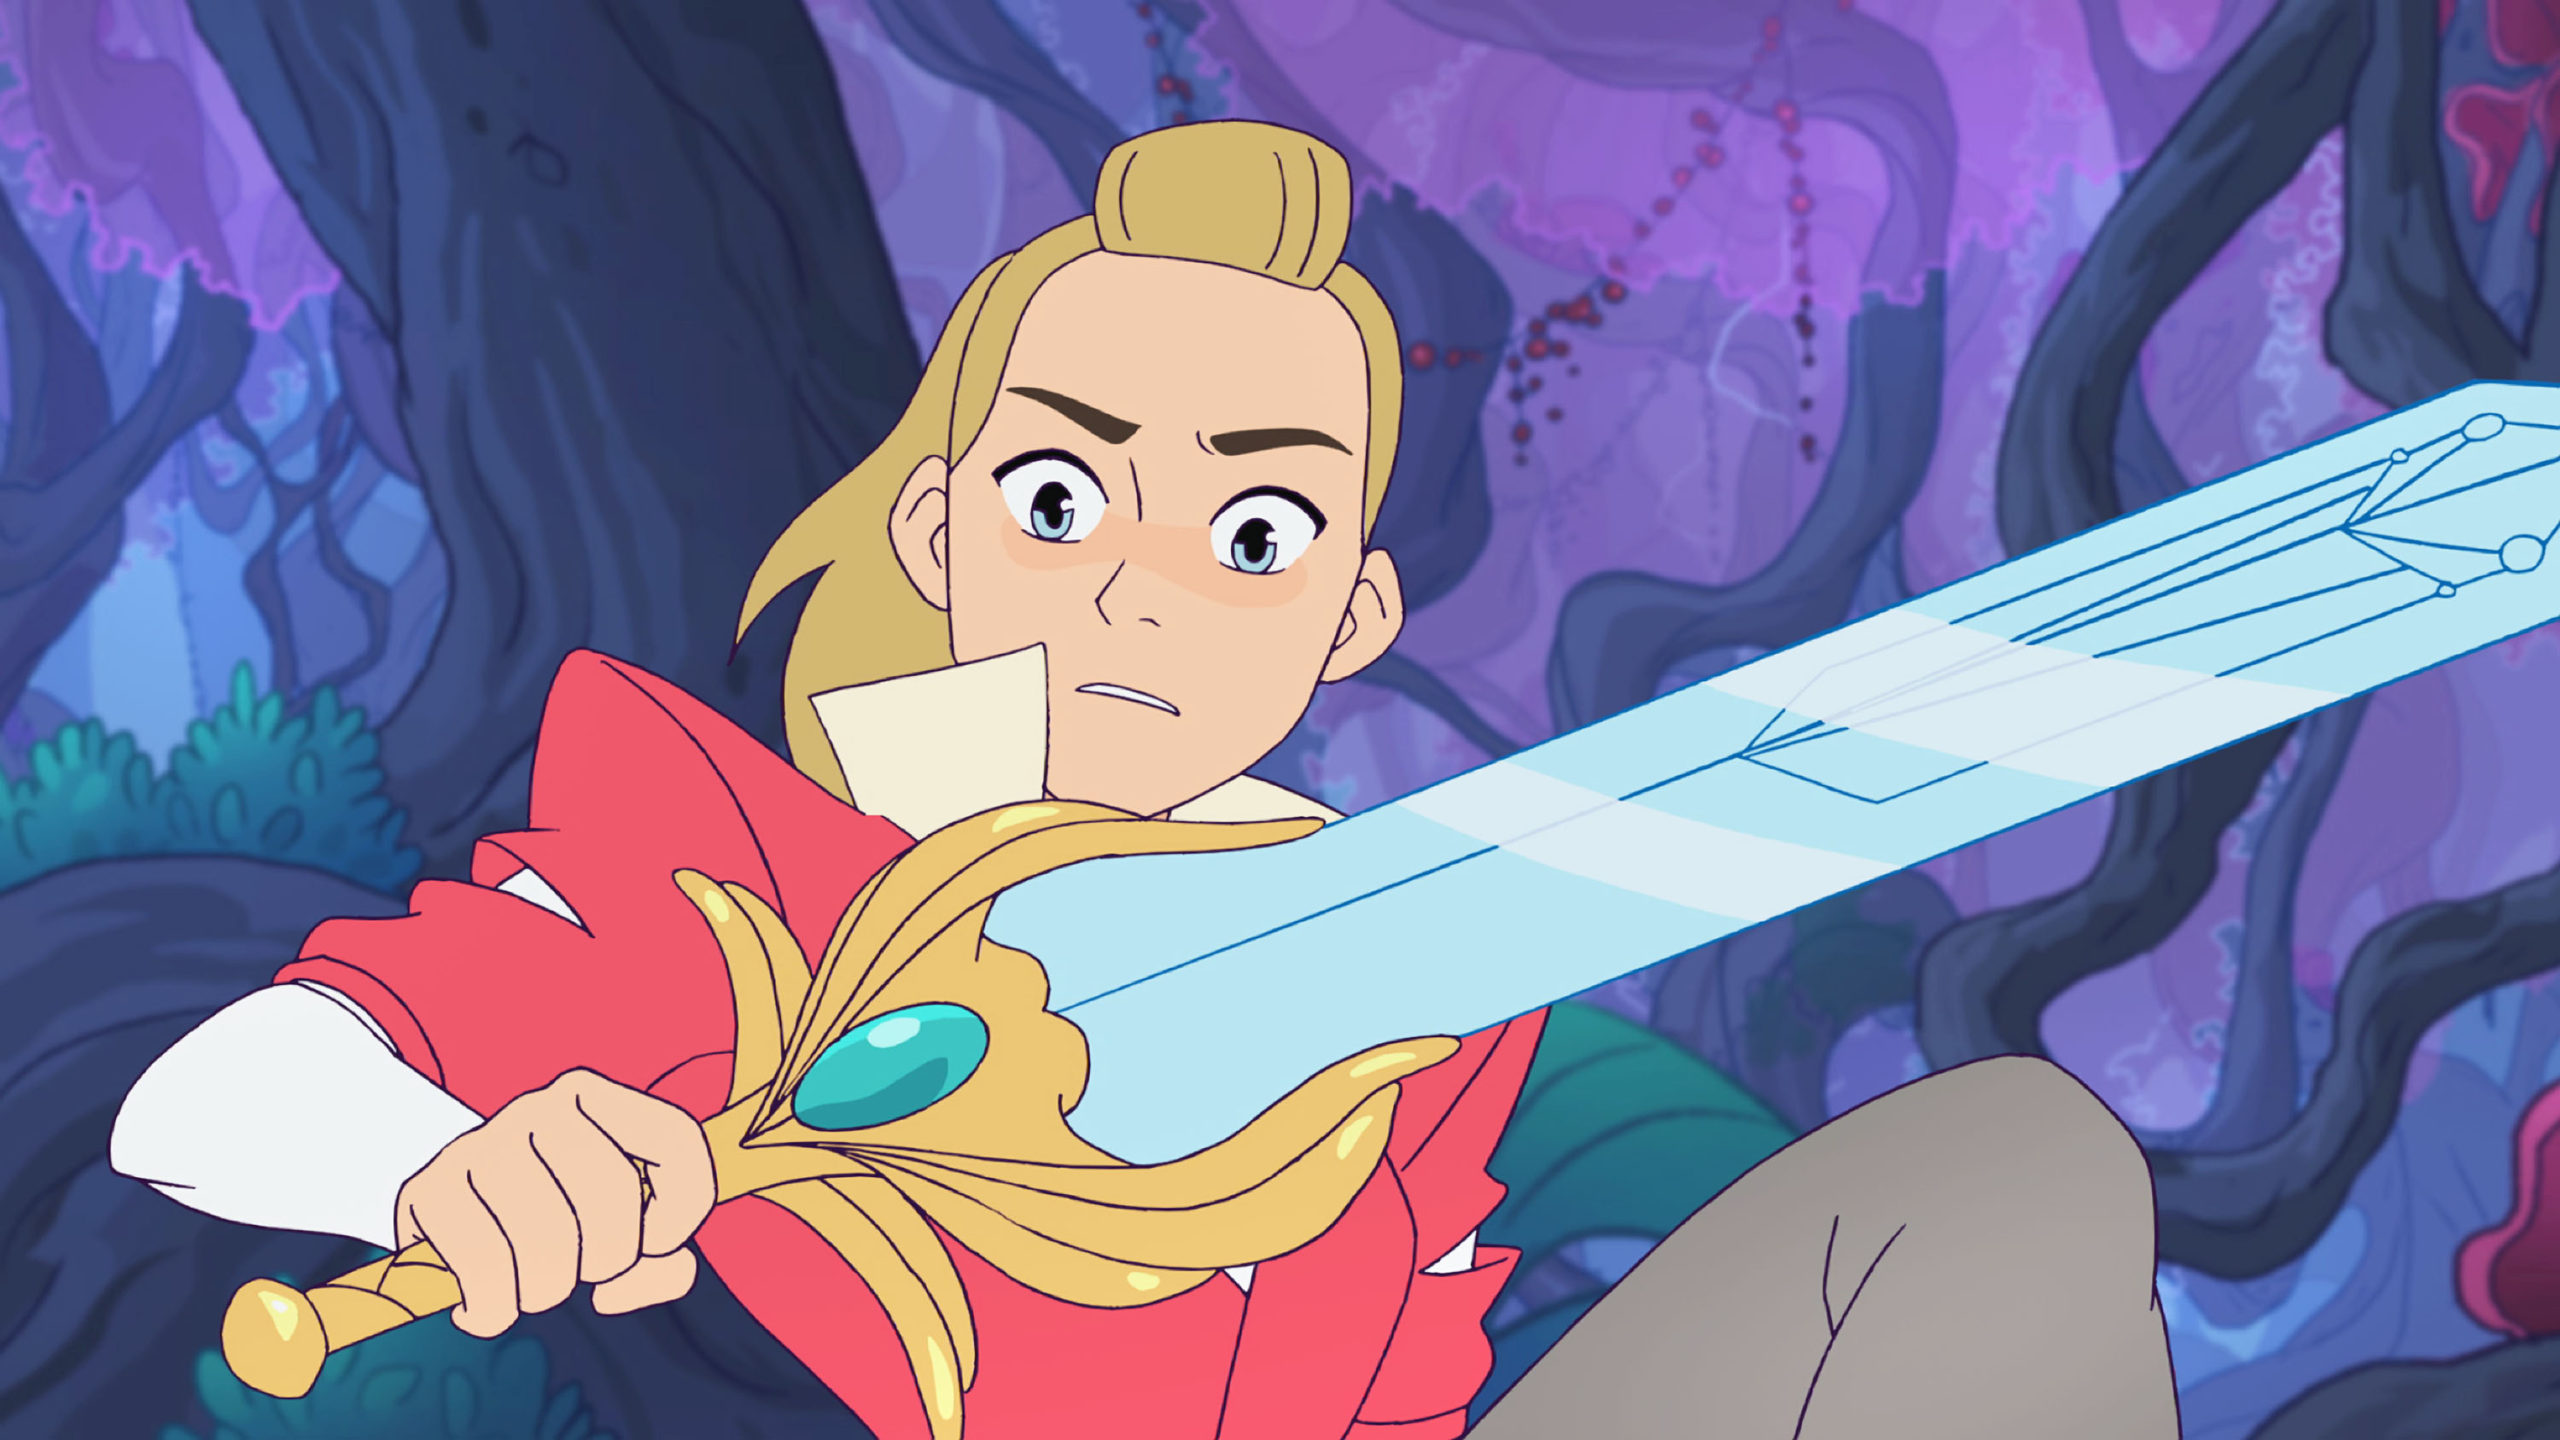 Adora is lost in a spooky forest and is shocked to find the sword of She-Ra.